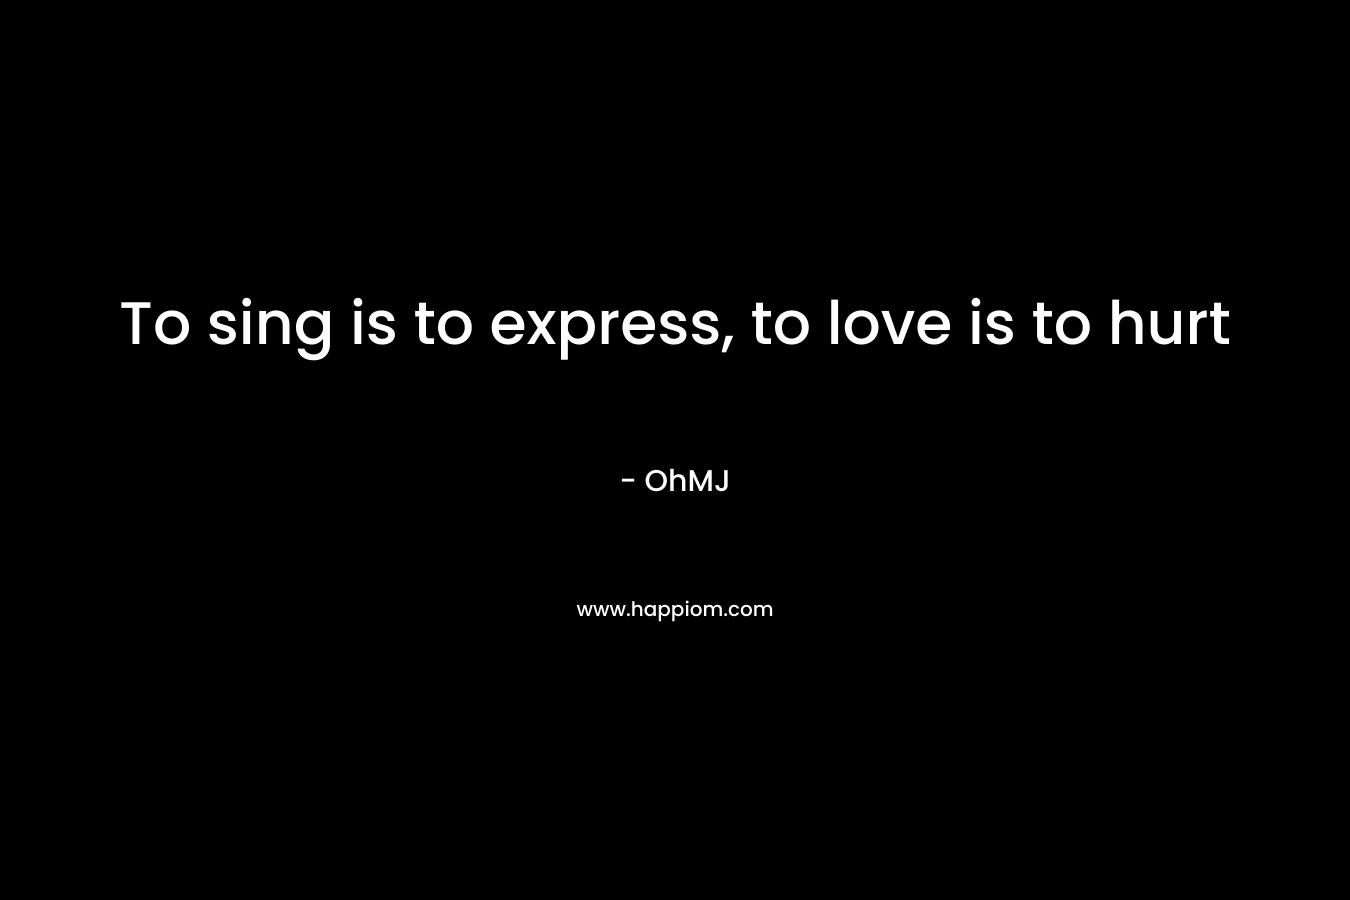 To sing is to express, to love is to hurt